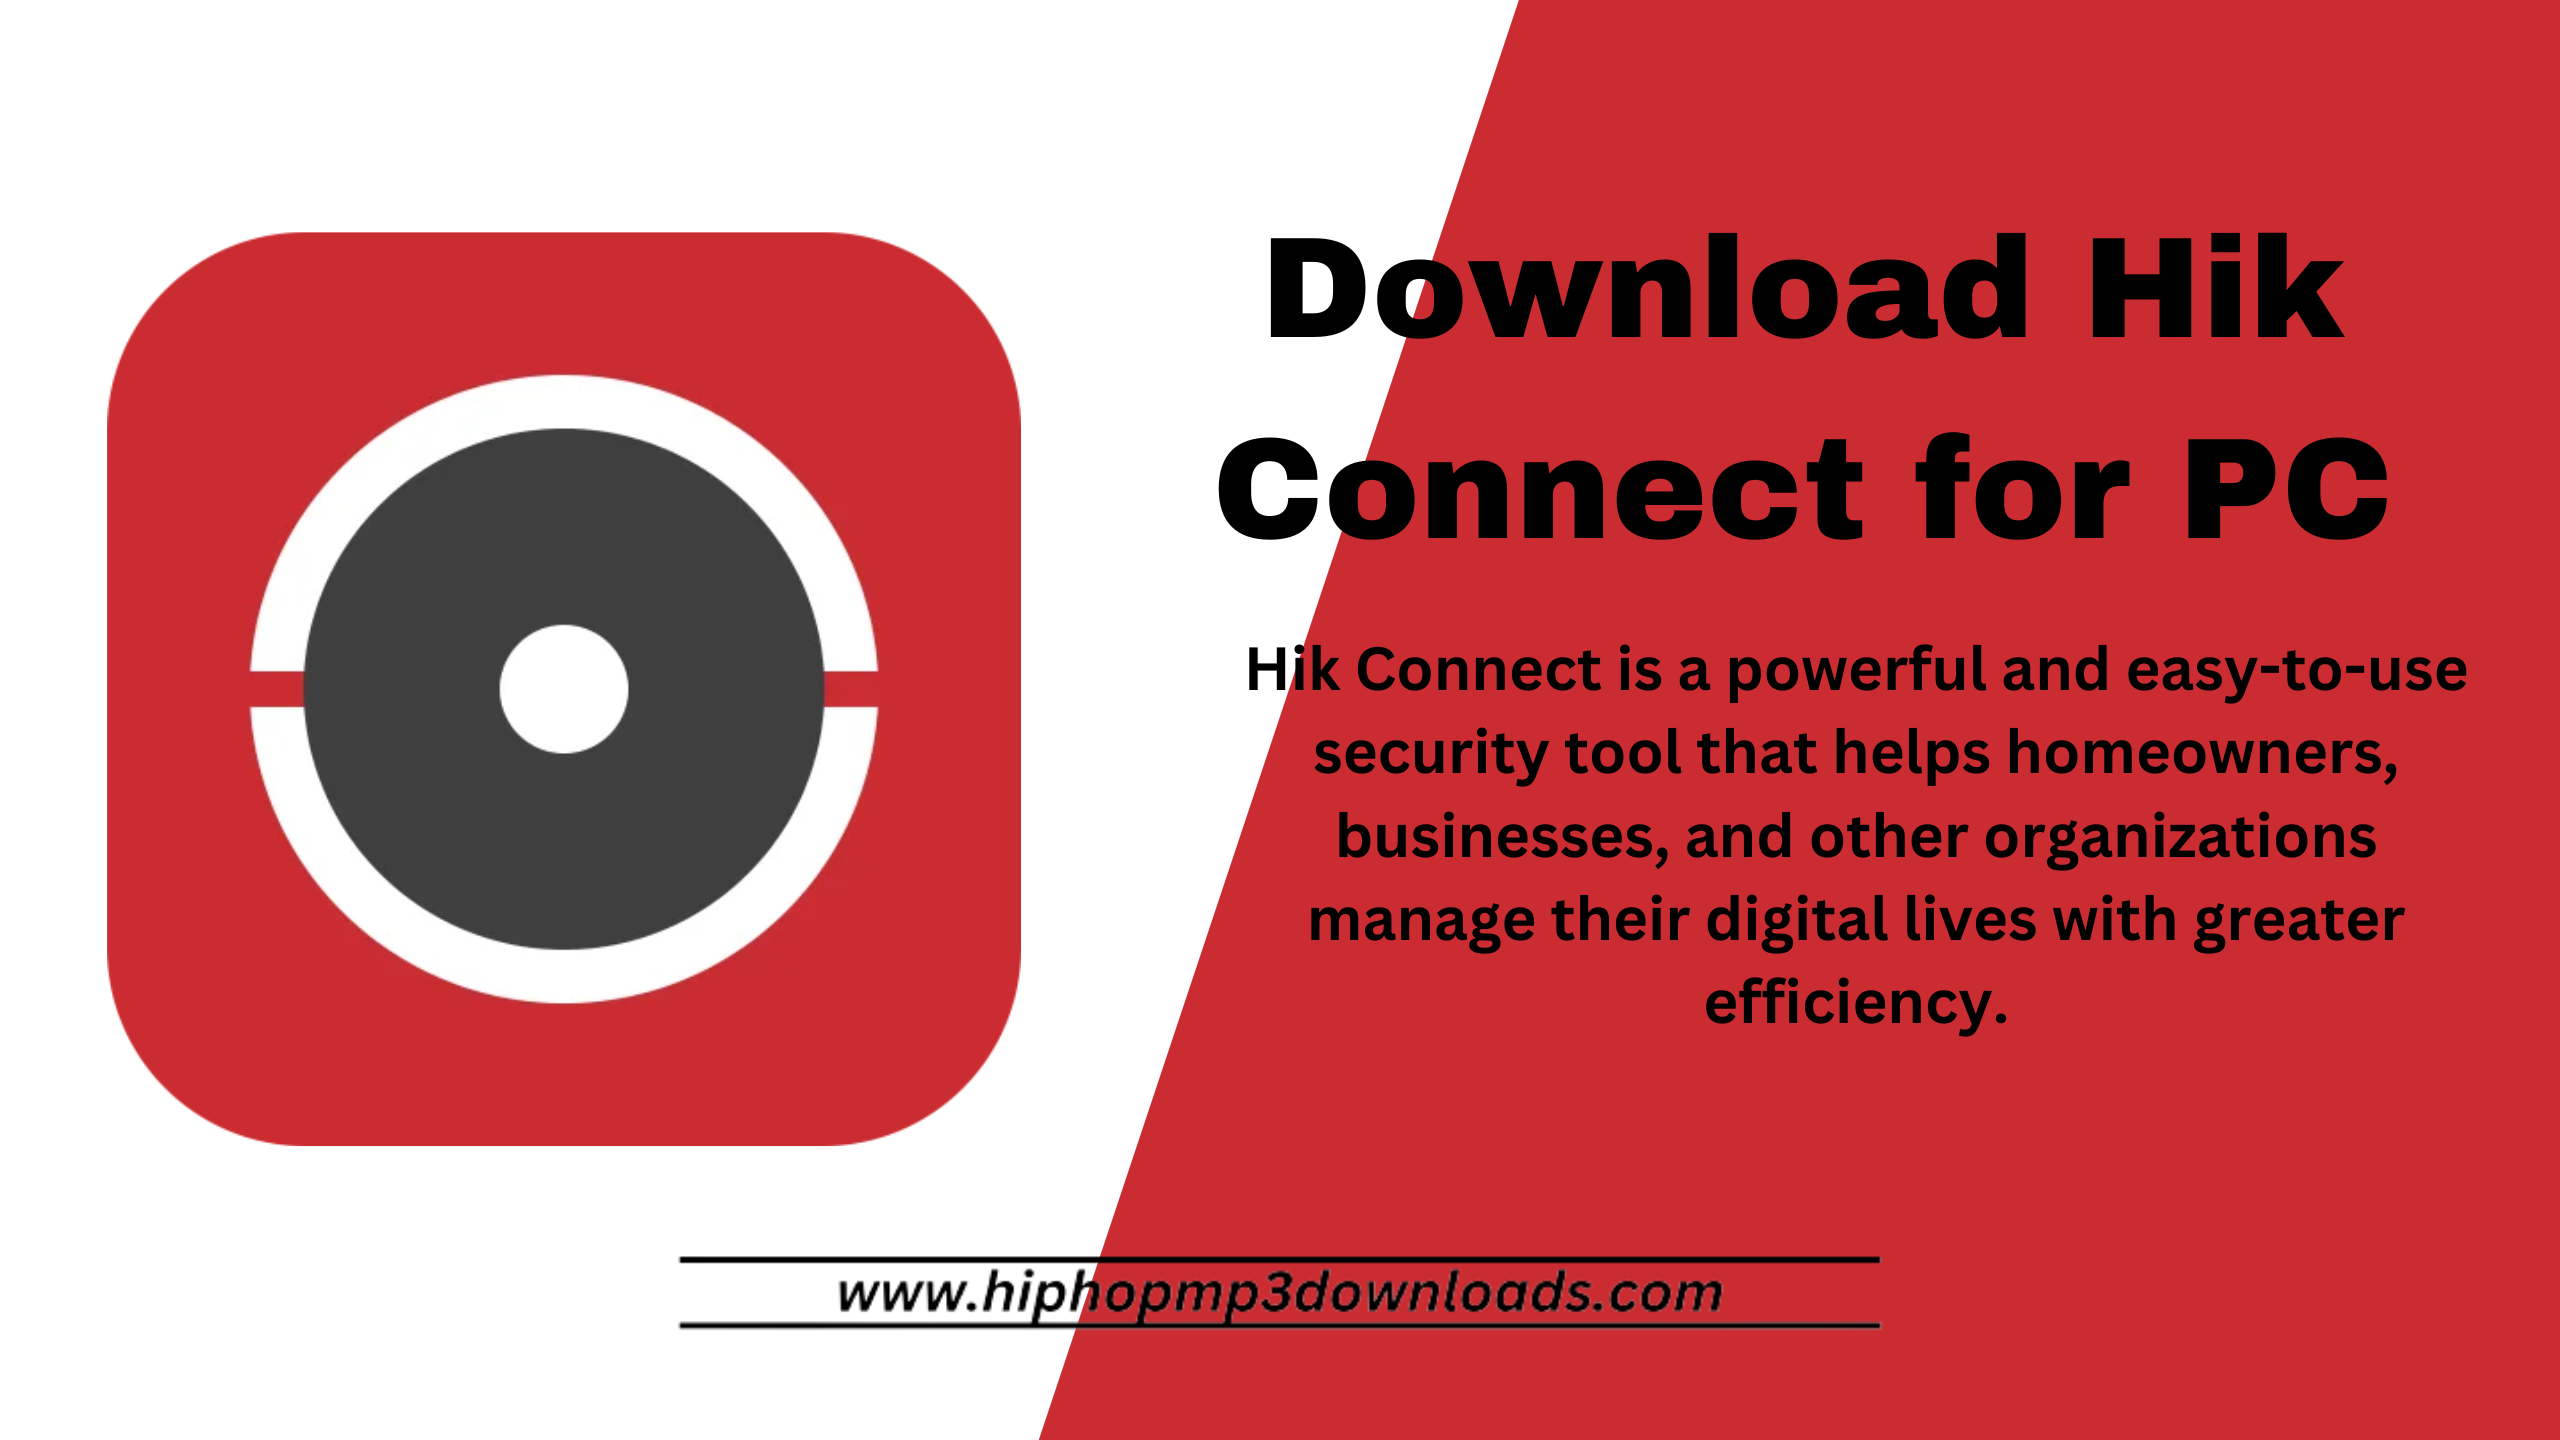 Download Hik Connect for PC